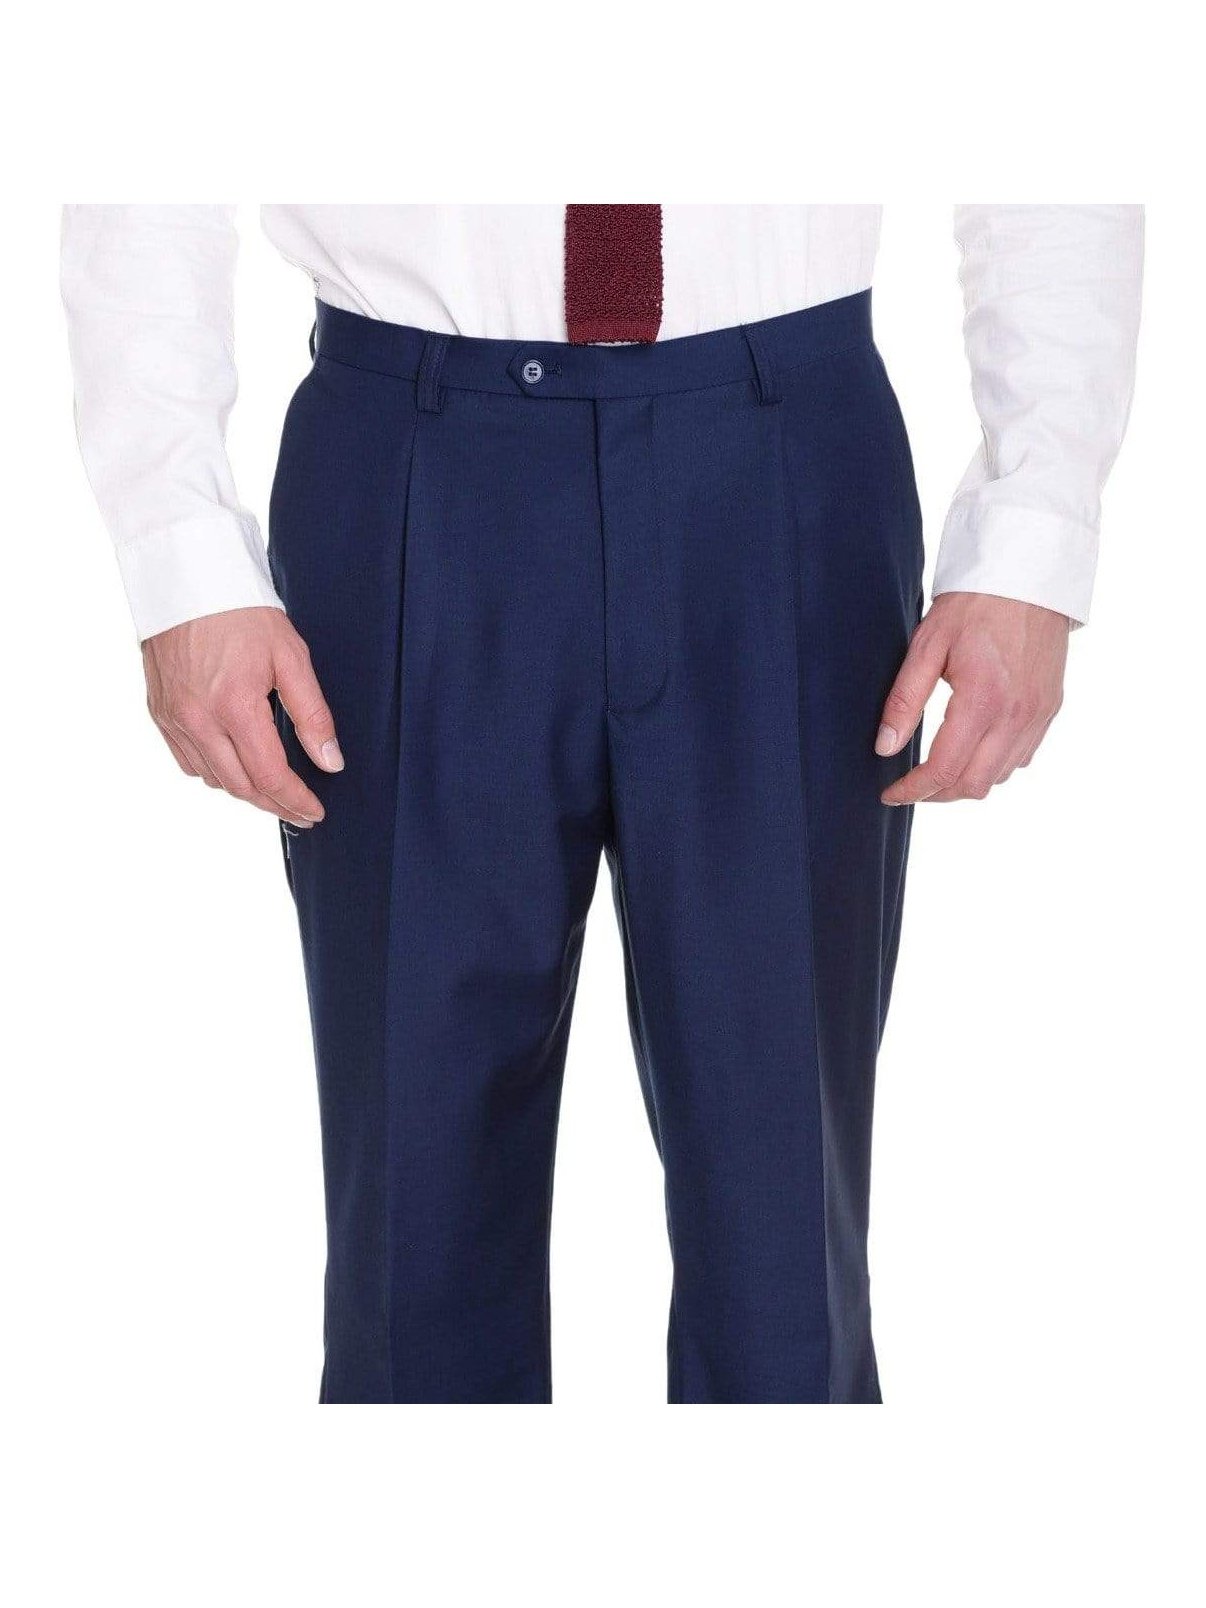 Raphael Classic Fit Solid Navy Blue Single Pleated Pants